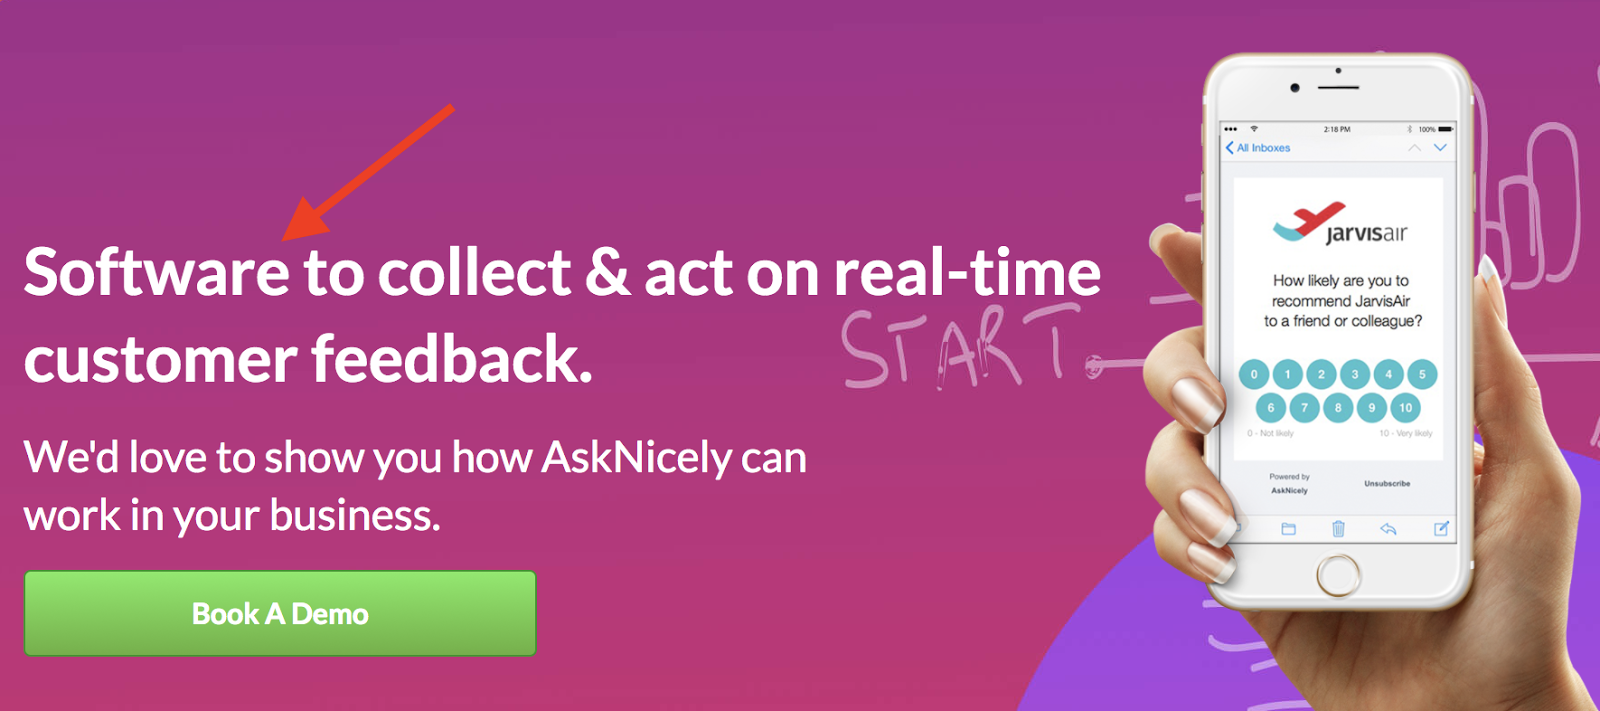 AskNicely landing page